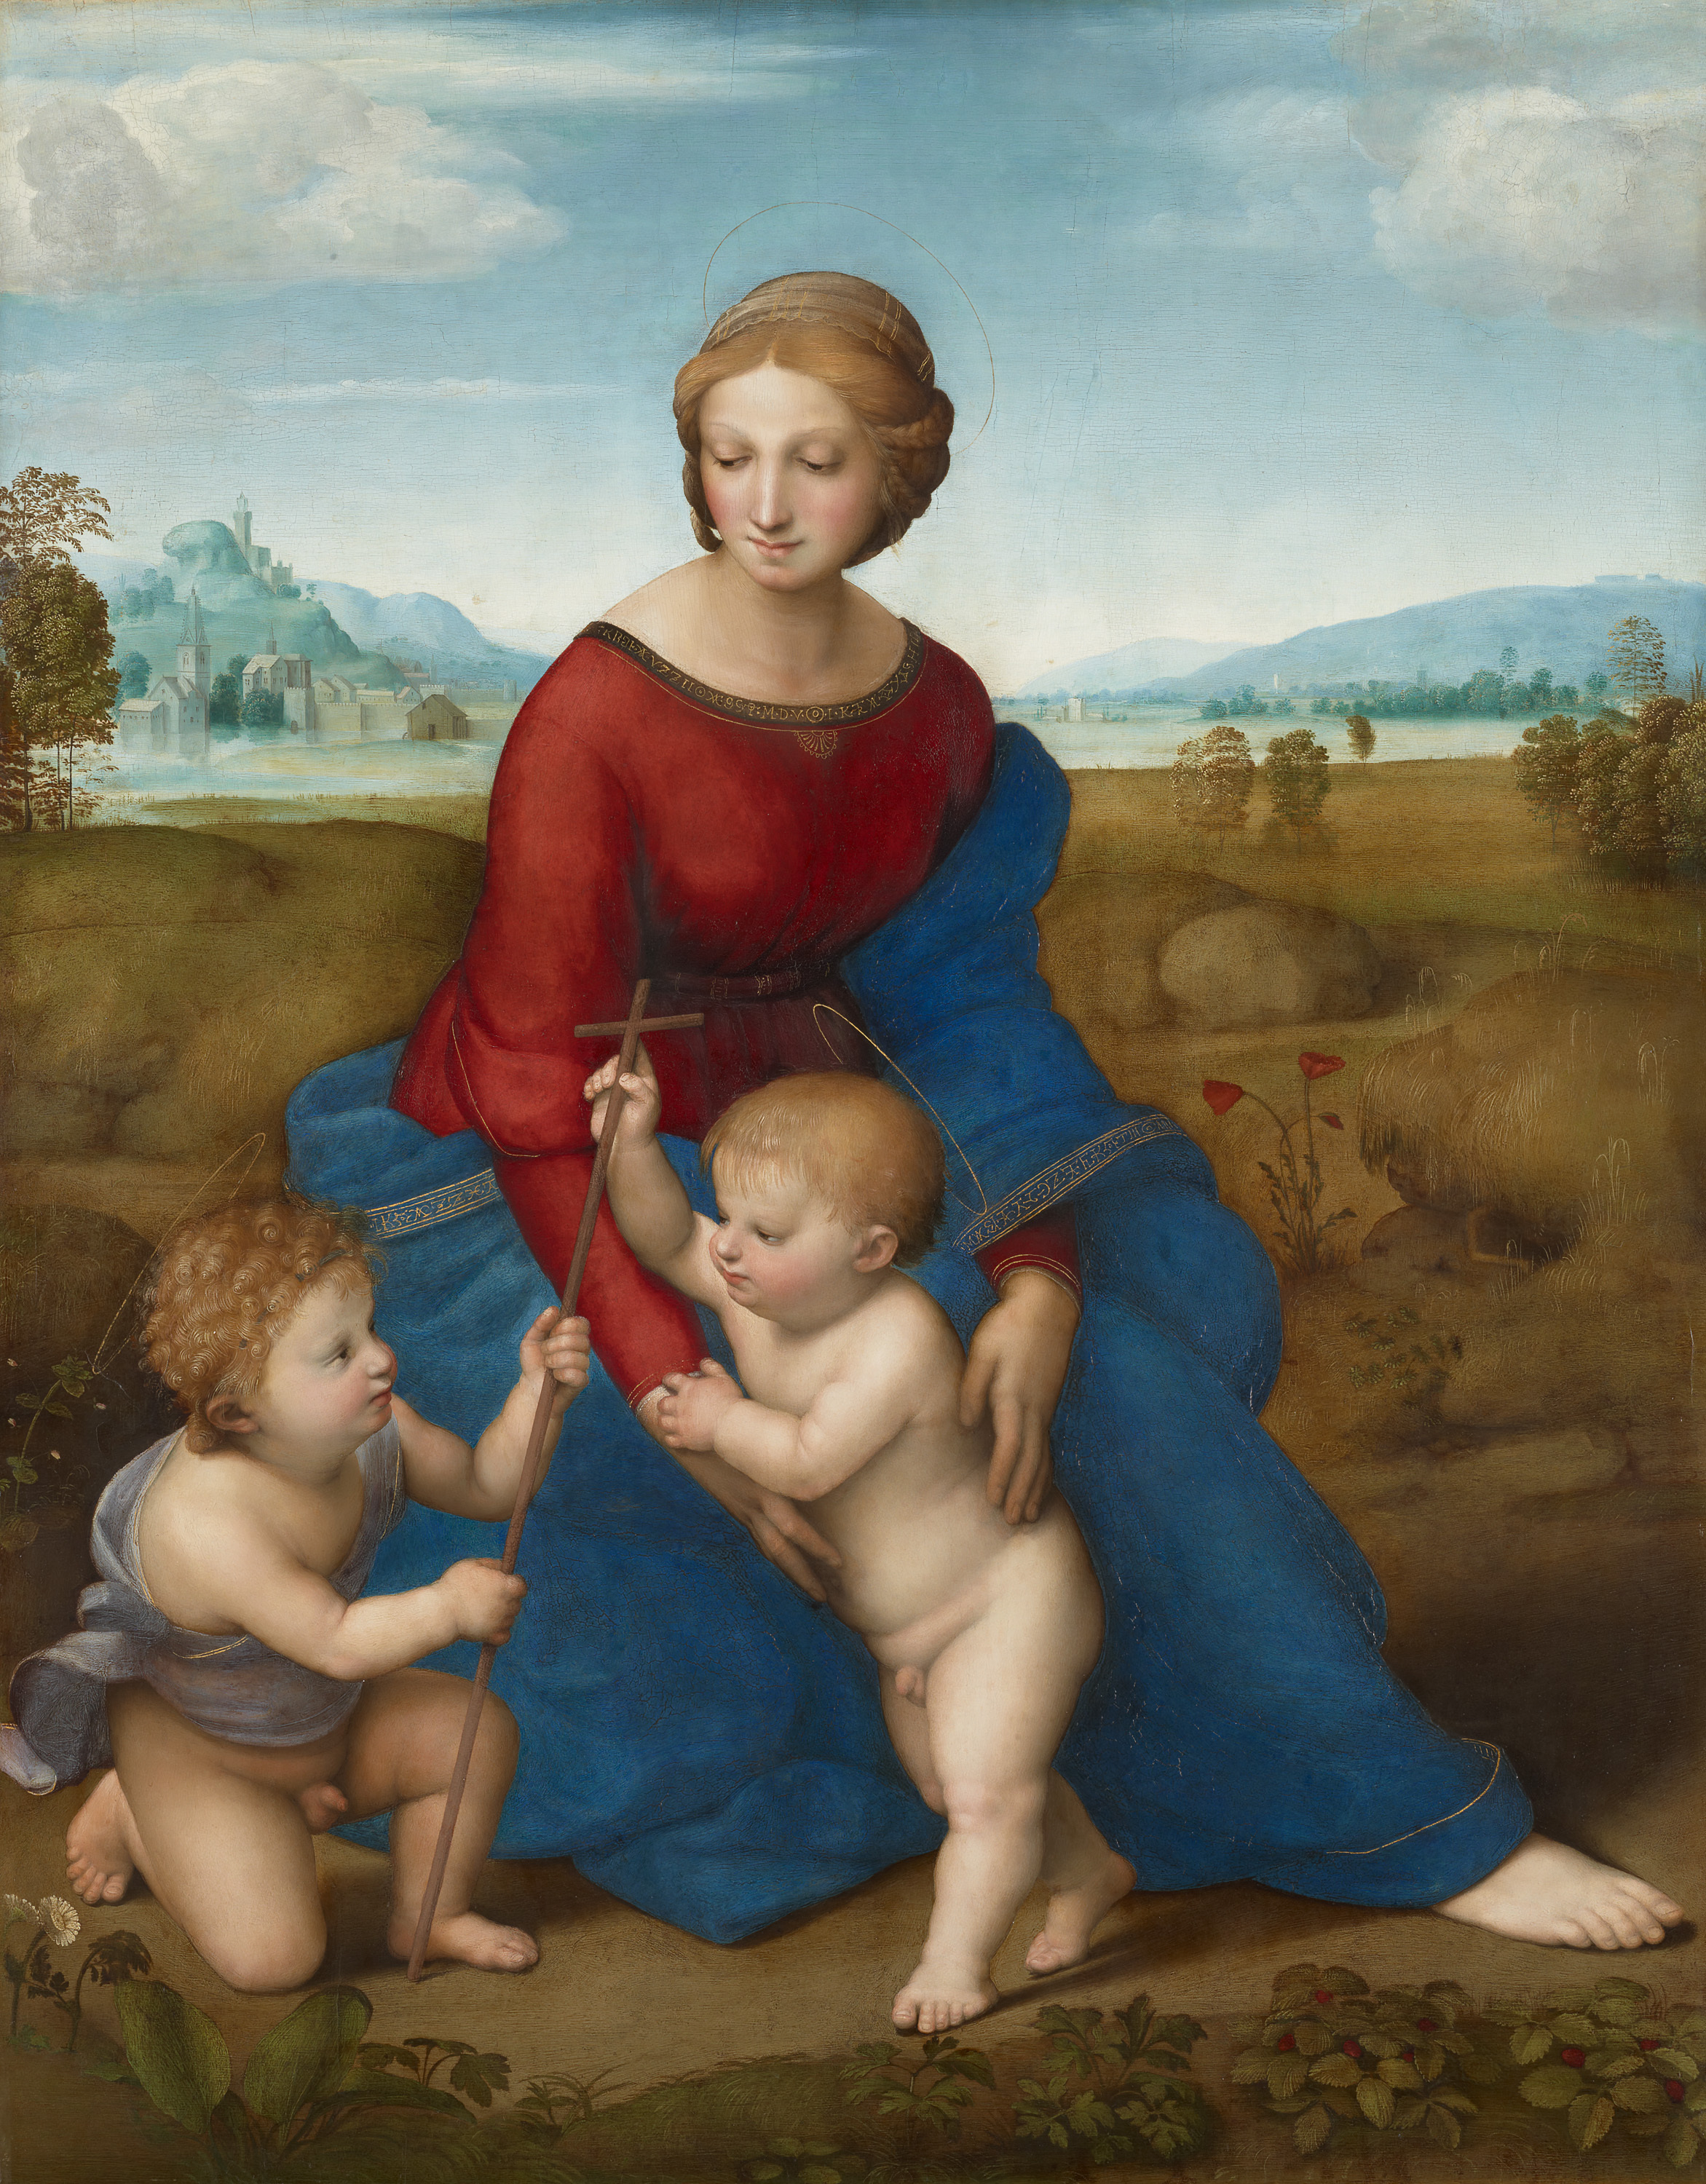 Madonna in the Meadow by Raphael Santi - 1505/1506 - 88.5 x 113 cm Kunsthistorisches Museum